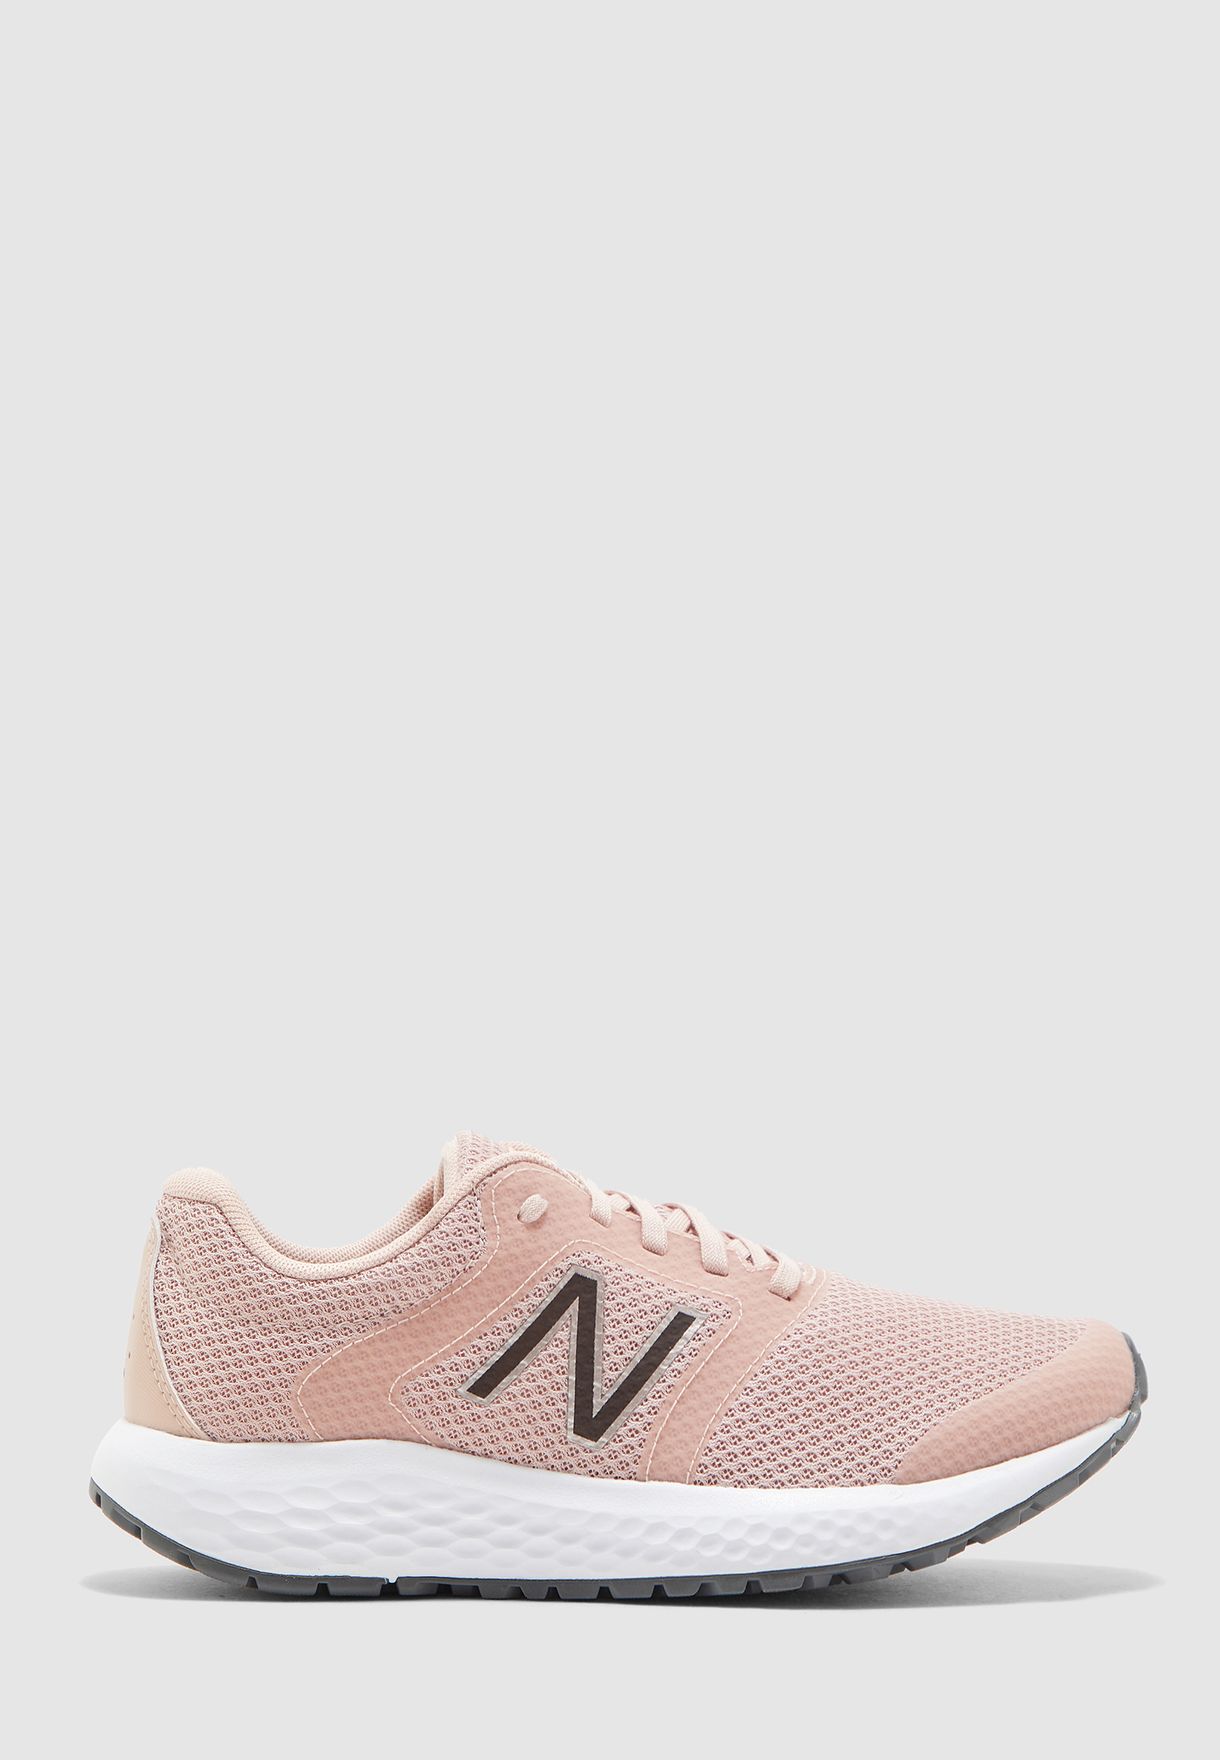 buy new balance pink shoes